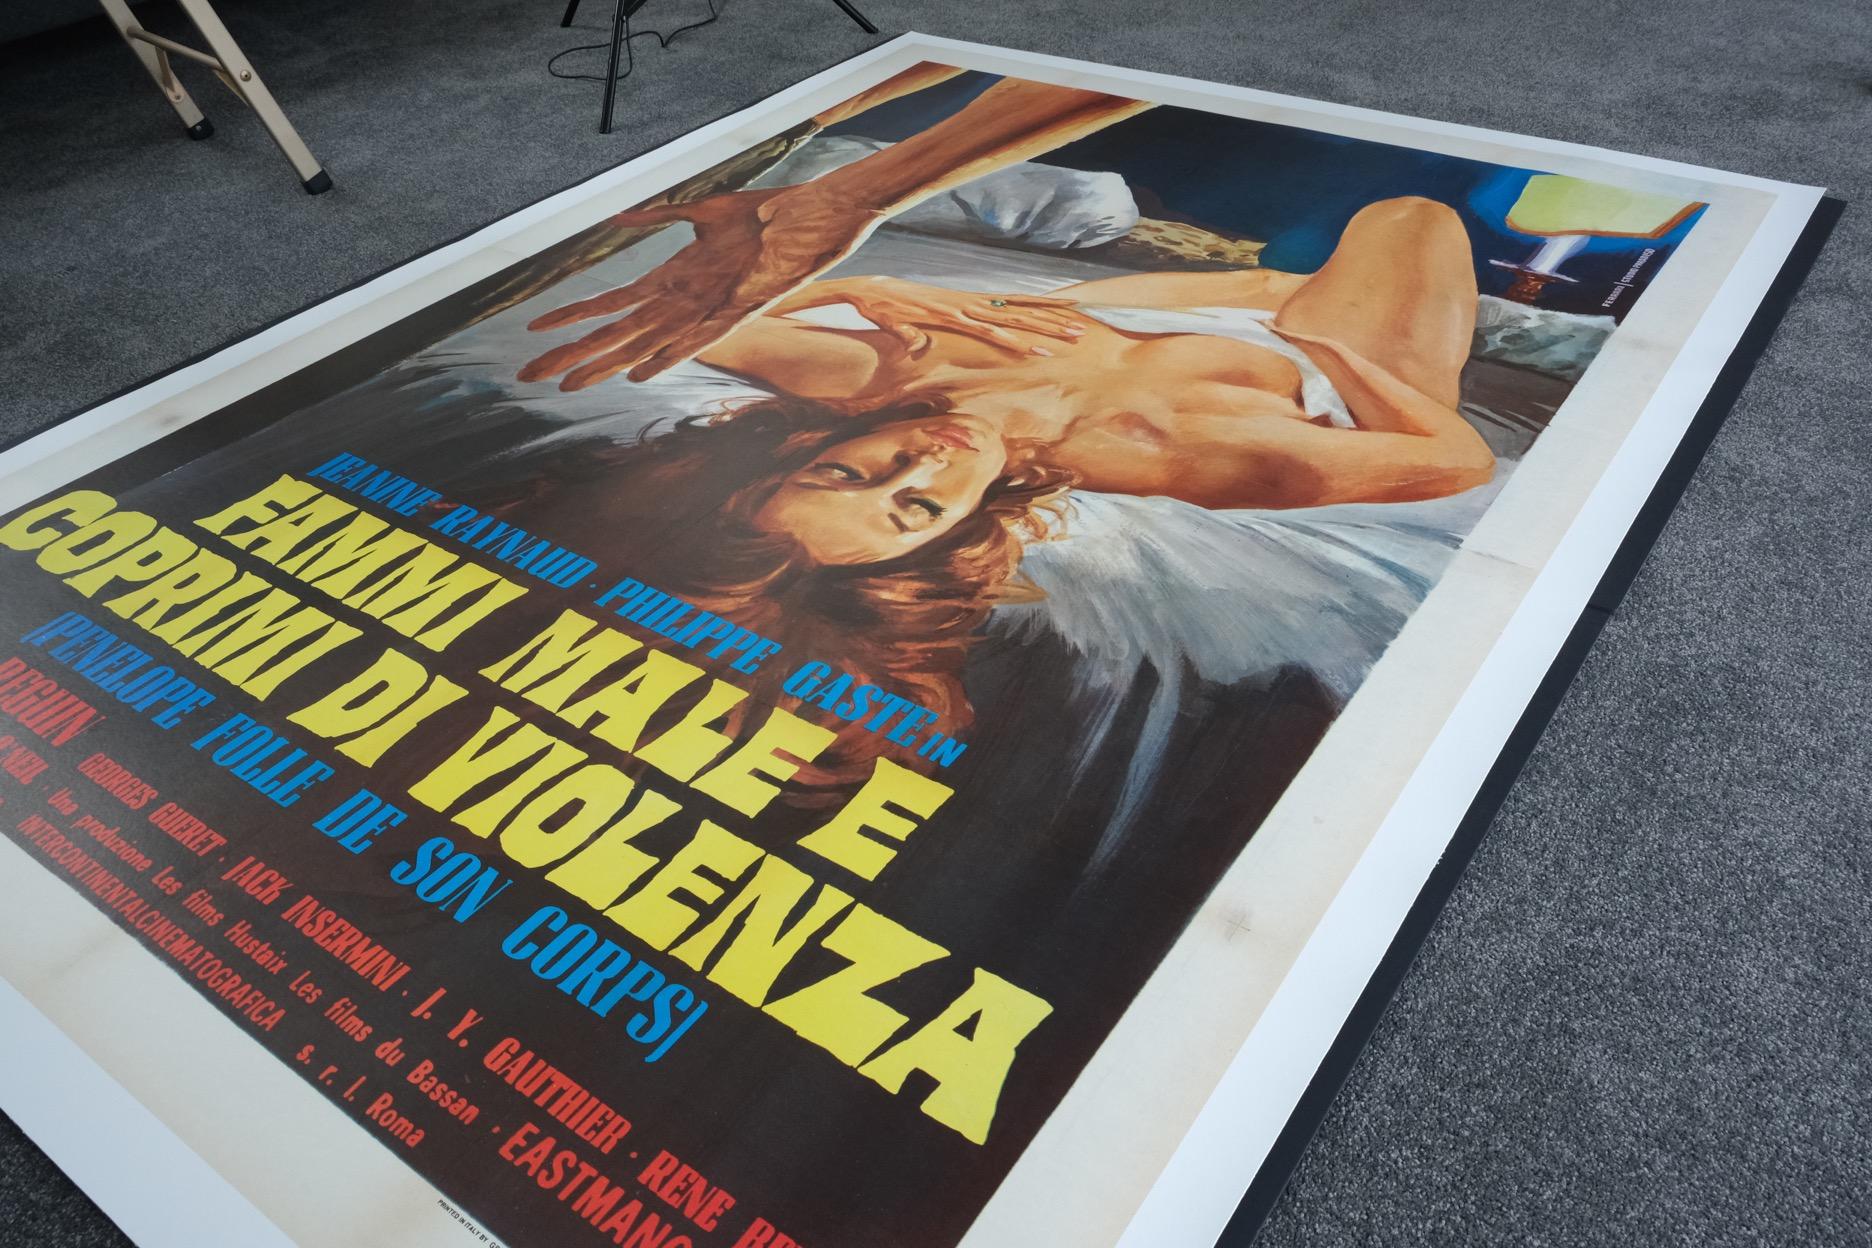 Size: Italian Four Sheet

Condition: Mint

Dimensions: 2080mm x 1175mm (inc. Linen Border)

Type: Original Lithographic Print - Linen Backed

Year: 1973

Details: A rare movie poster artwork for the Italian sexploitation film ‘Fammi Male E